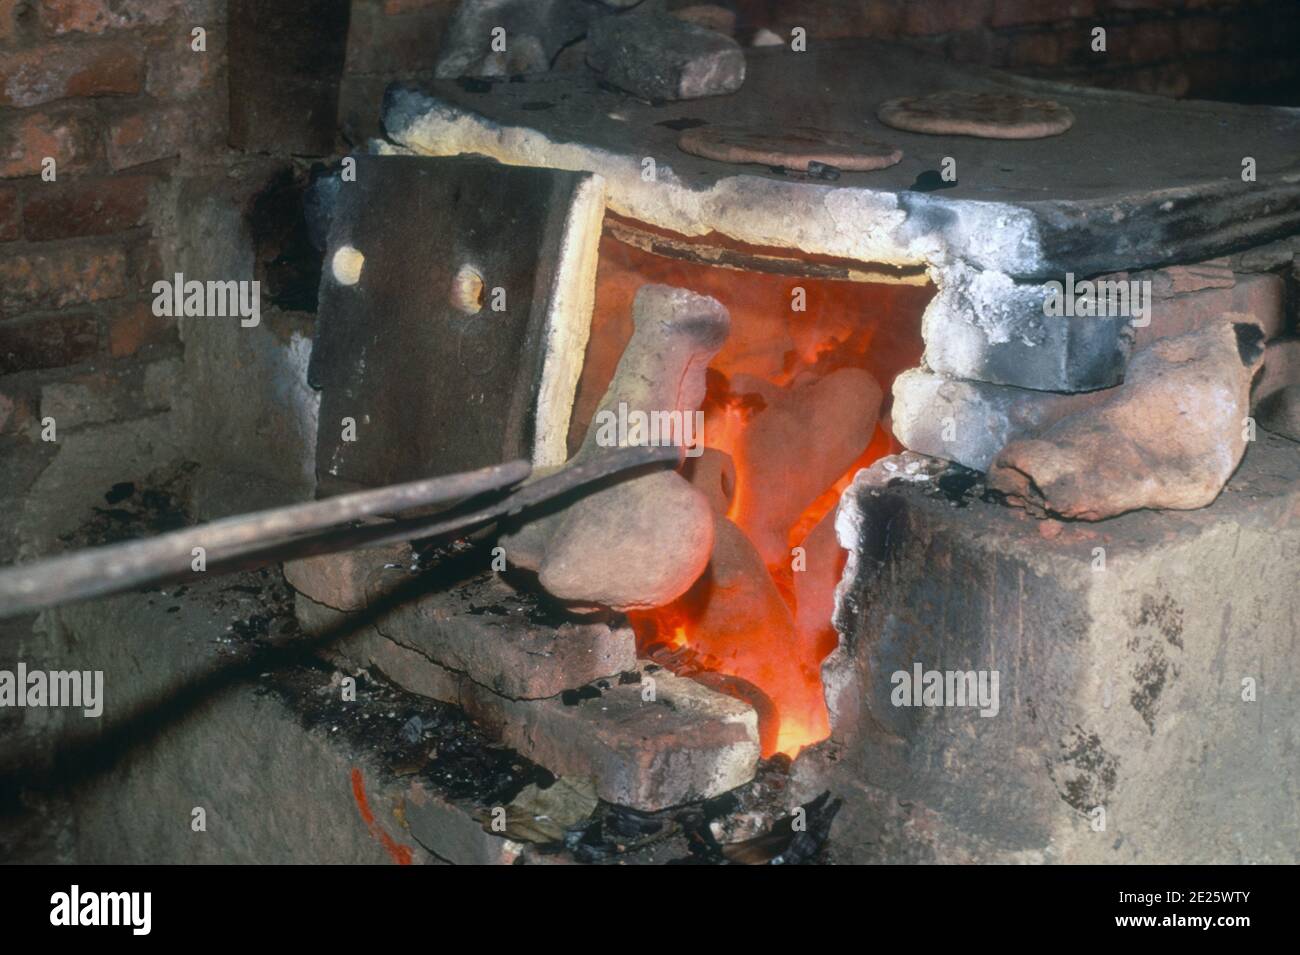 Furnace used in the process of lost wax metal casting of statues and figurines in Nepal Stock Photo